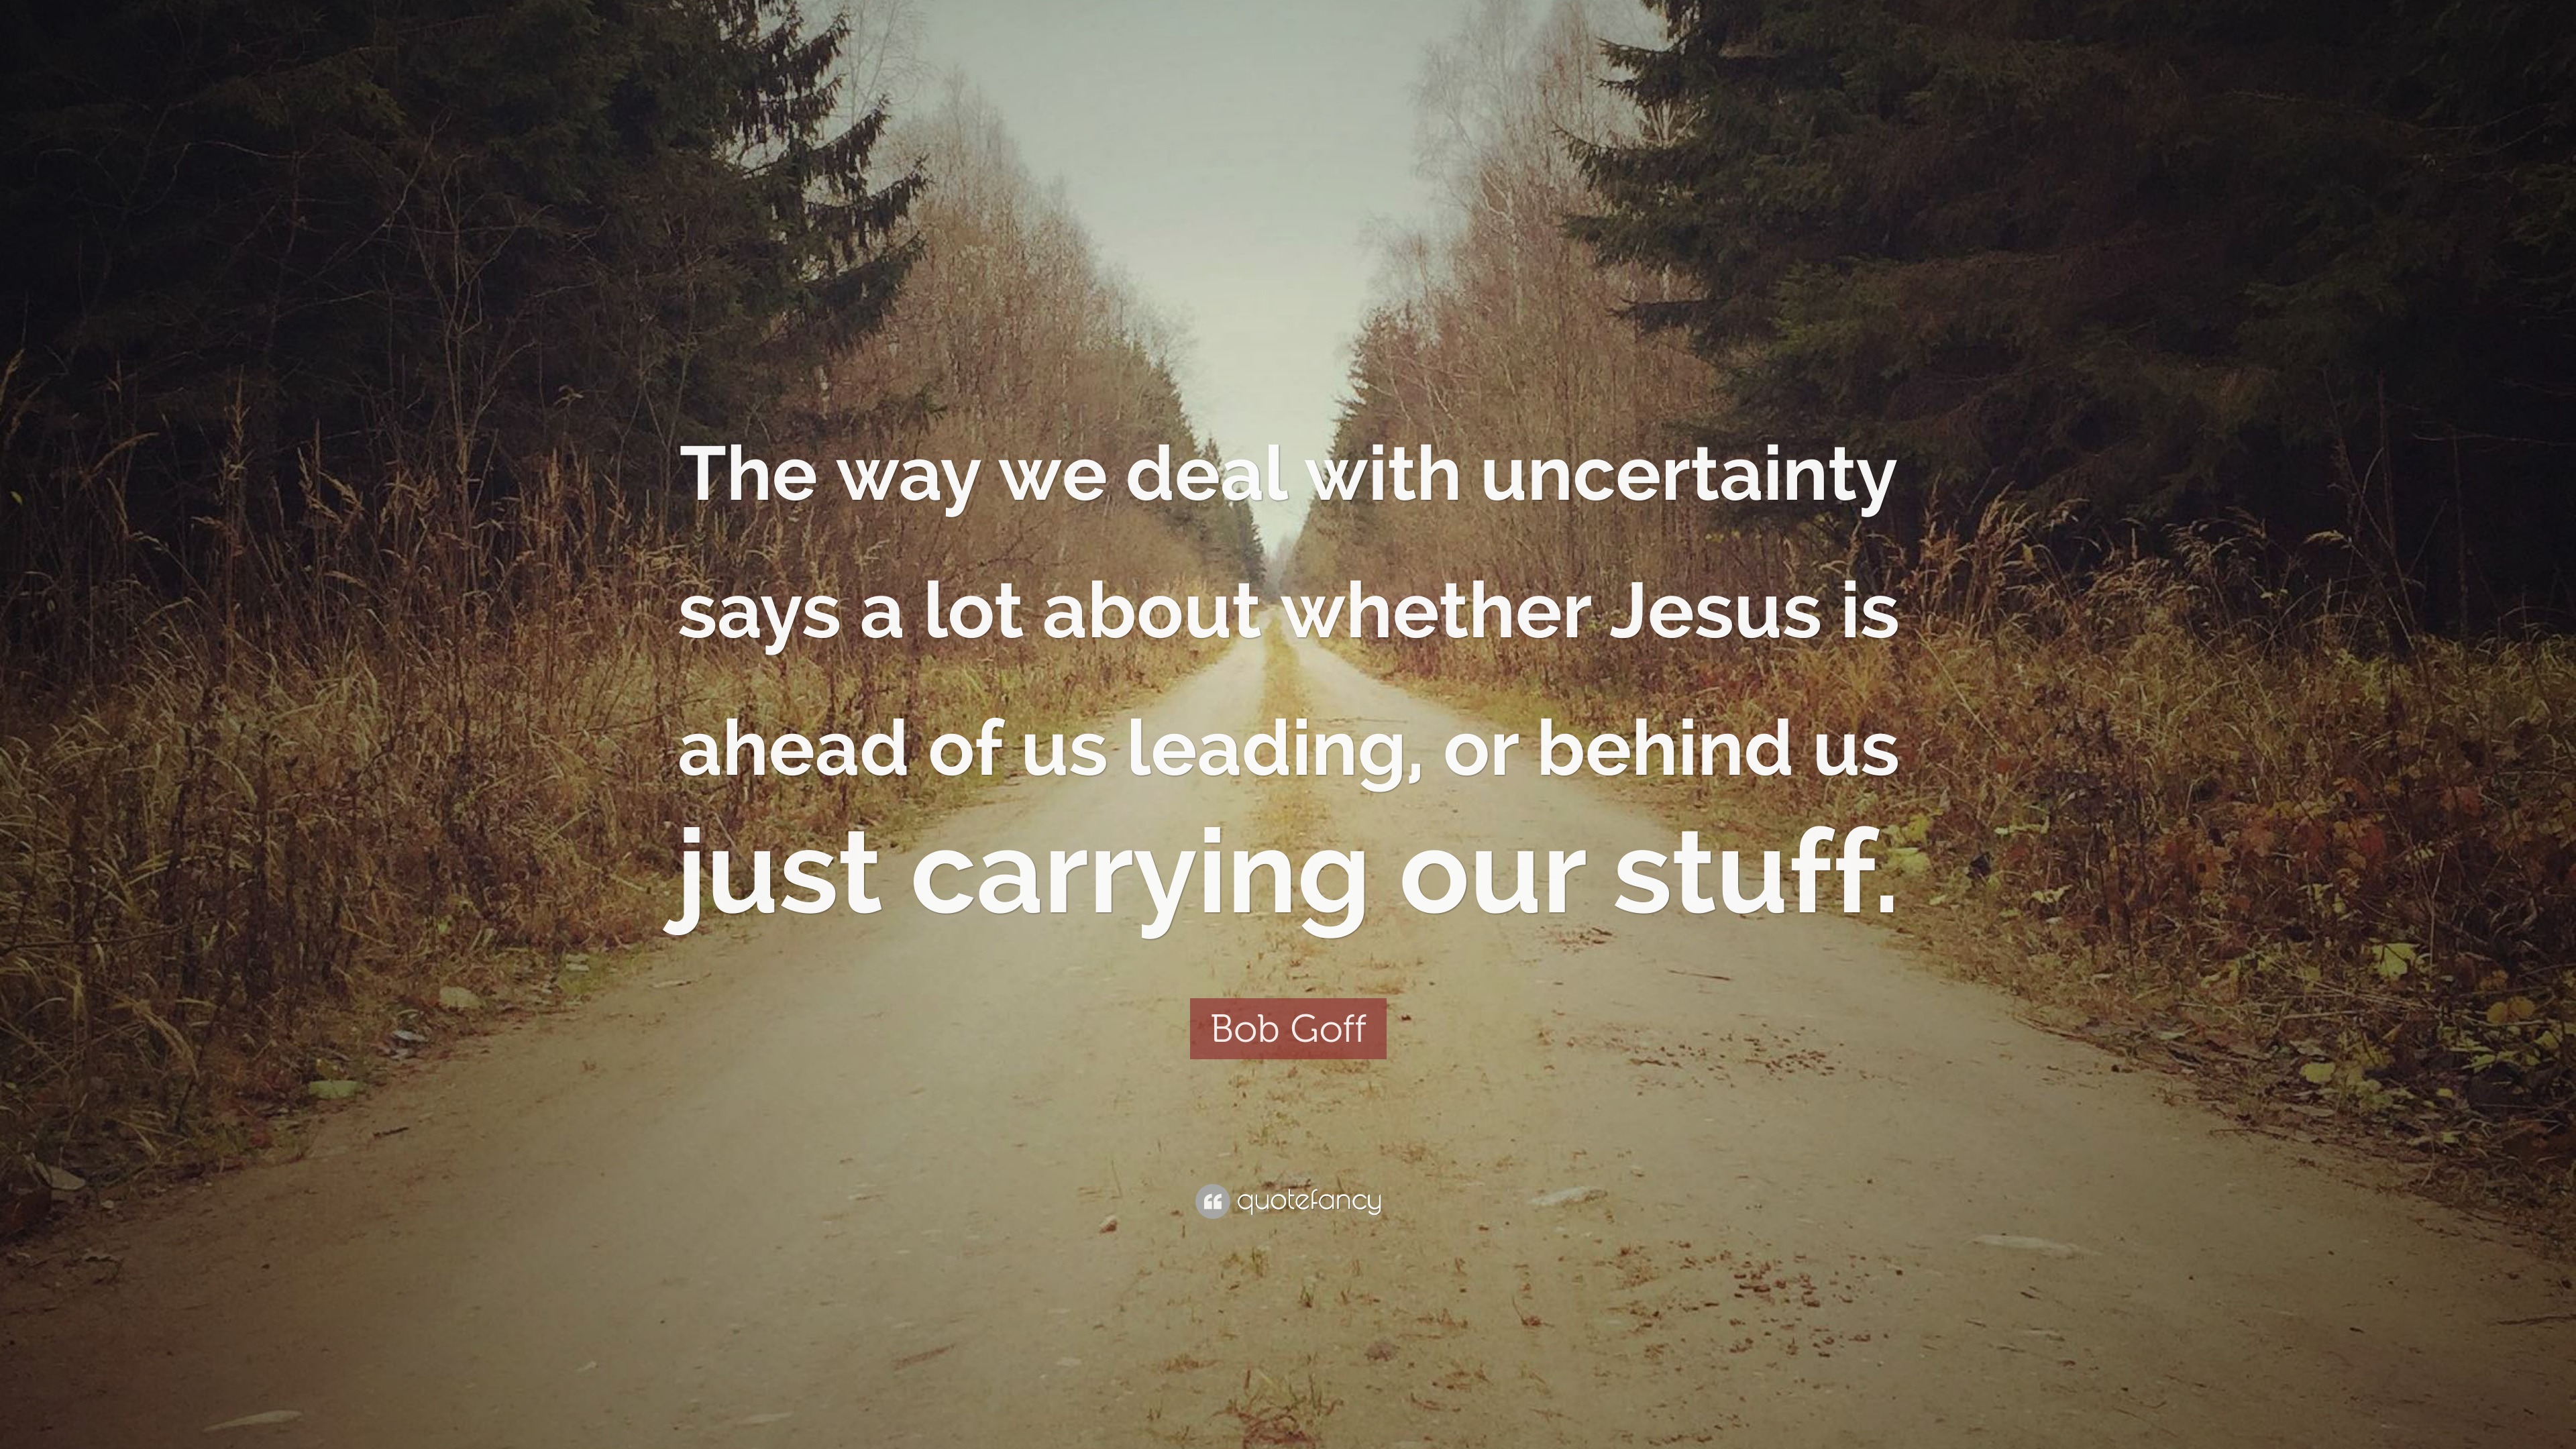 Bob Goff Quote: “The way we deal with uncertainty says a lot about